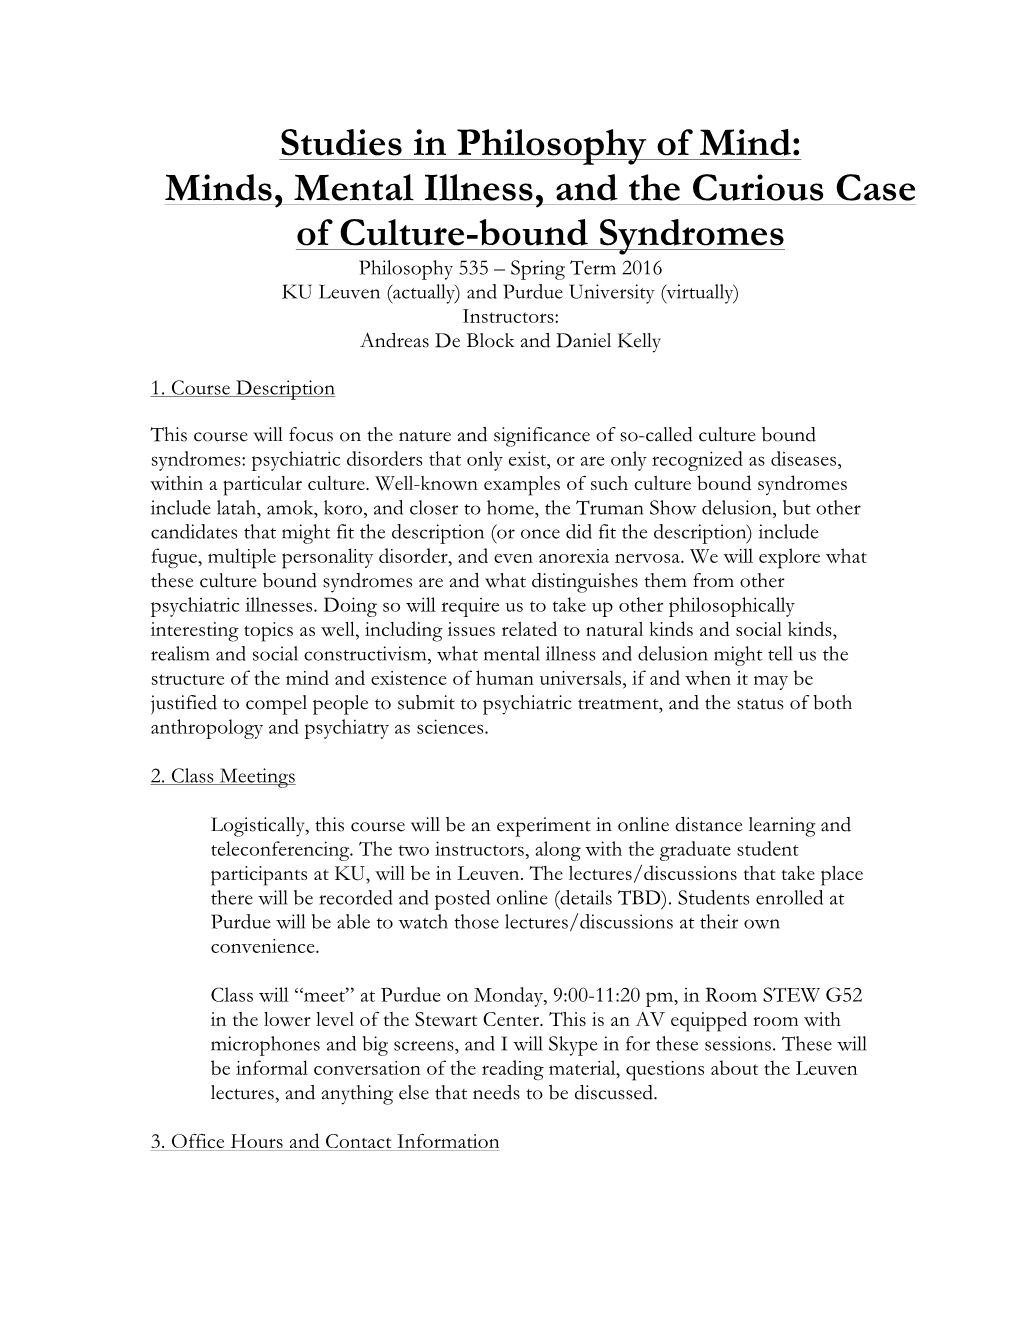 Studies in Philosophy of Mind: Minds, Mental Illness, and the Curious Case of Culture-Bound Syndromes